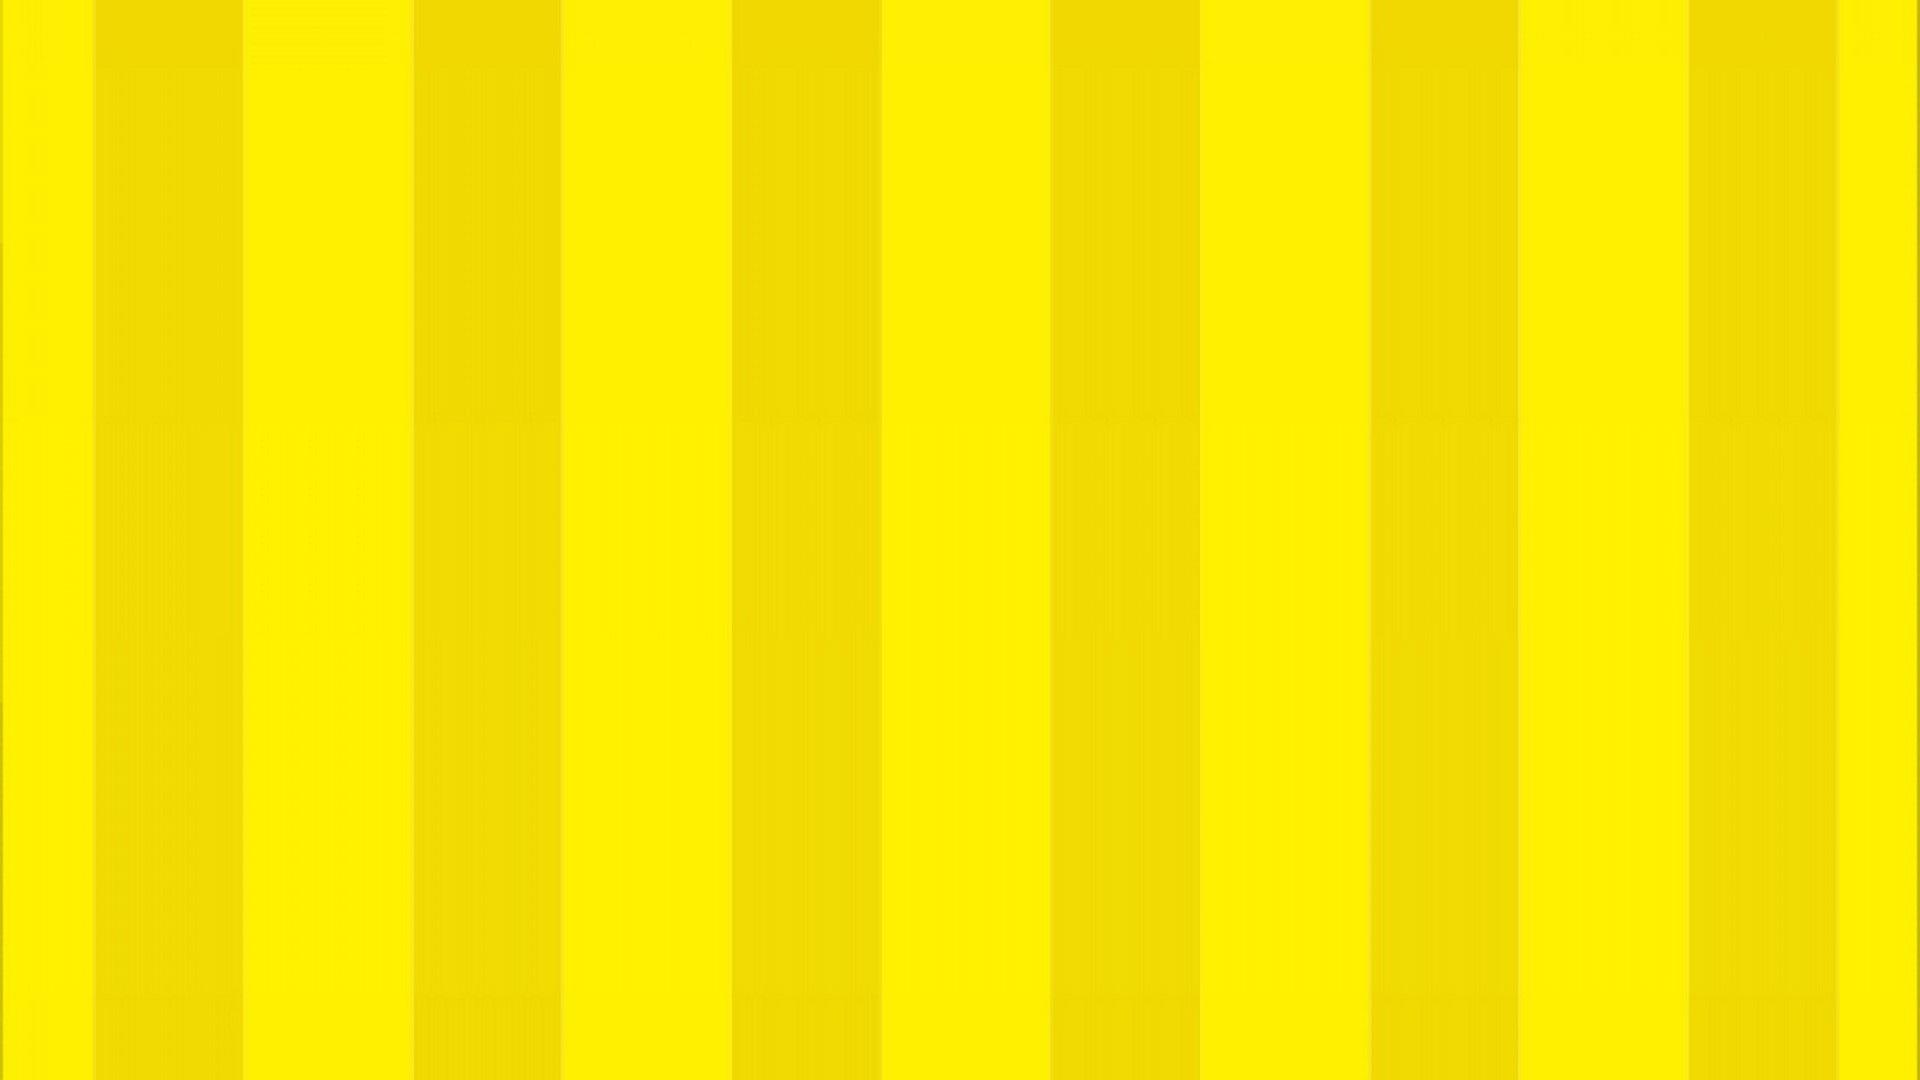 Yellow Desktop Wallpaper with resolution 1920X1080 pixel. You can use this wallpaper as background for your desktop Computer Screensavers, Android or iPhone smartphones